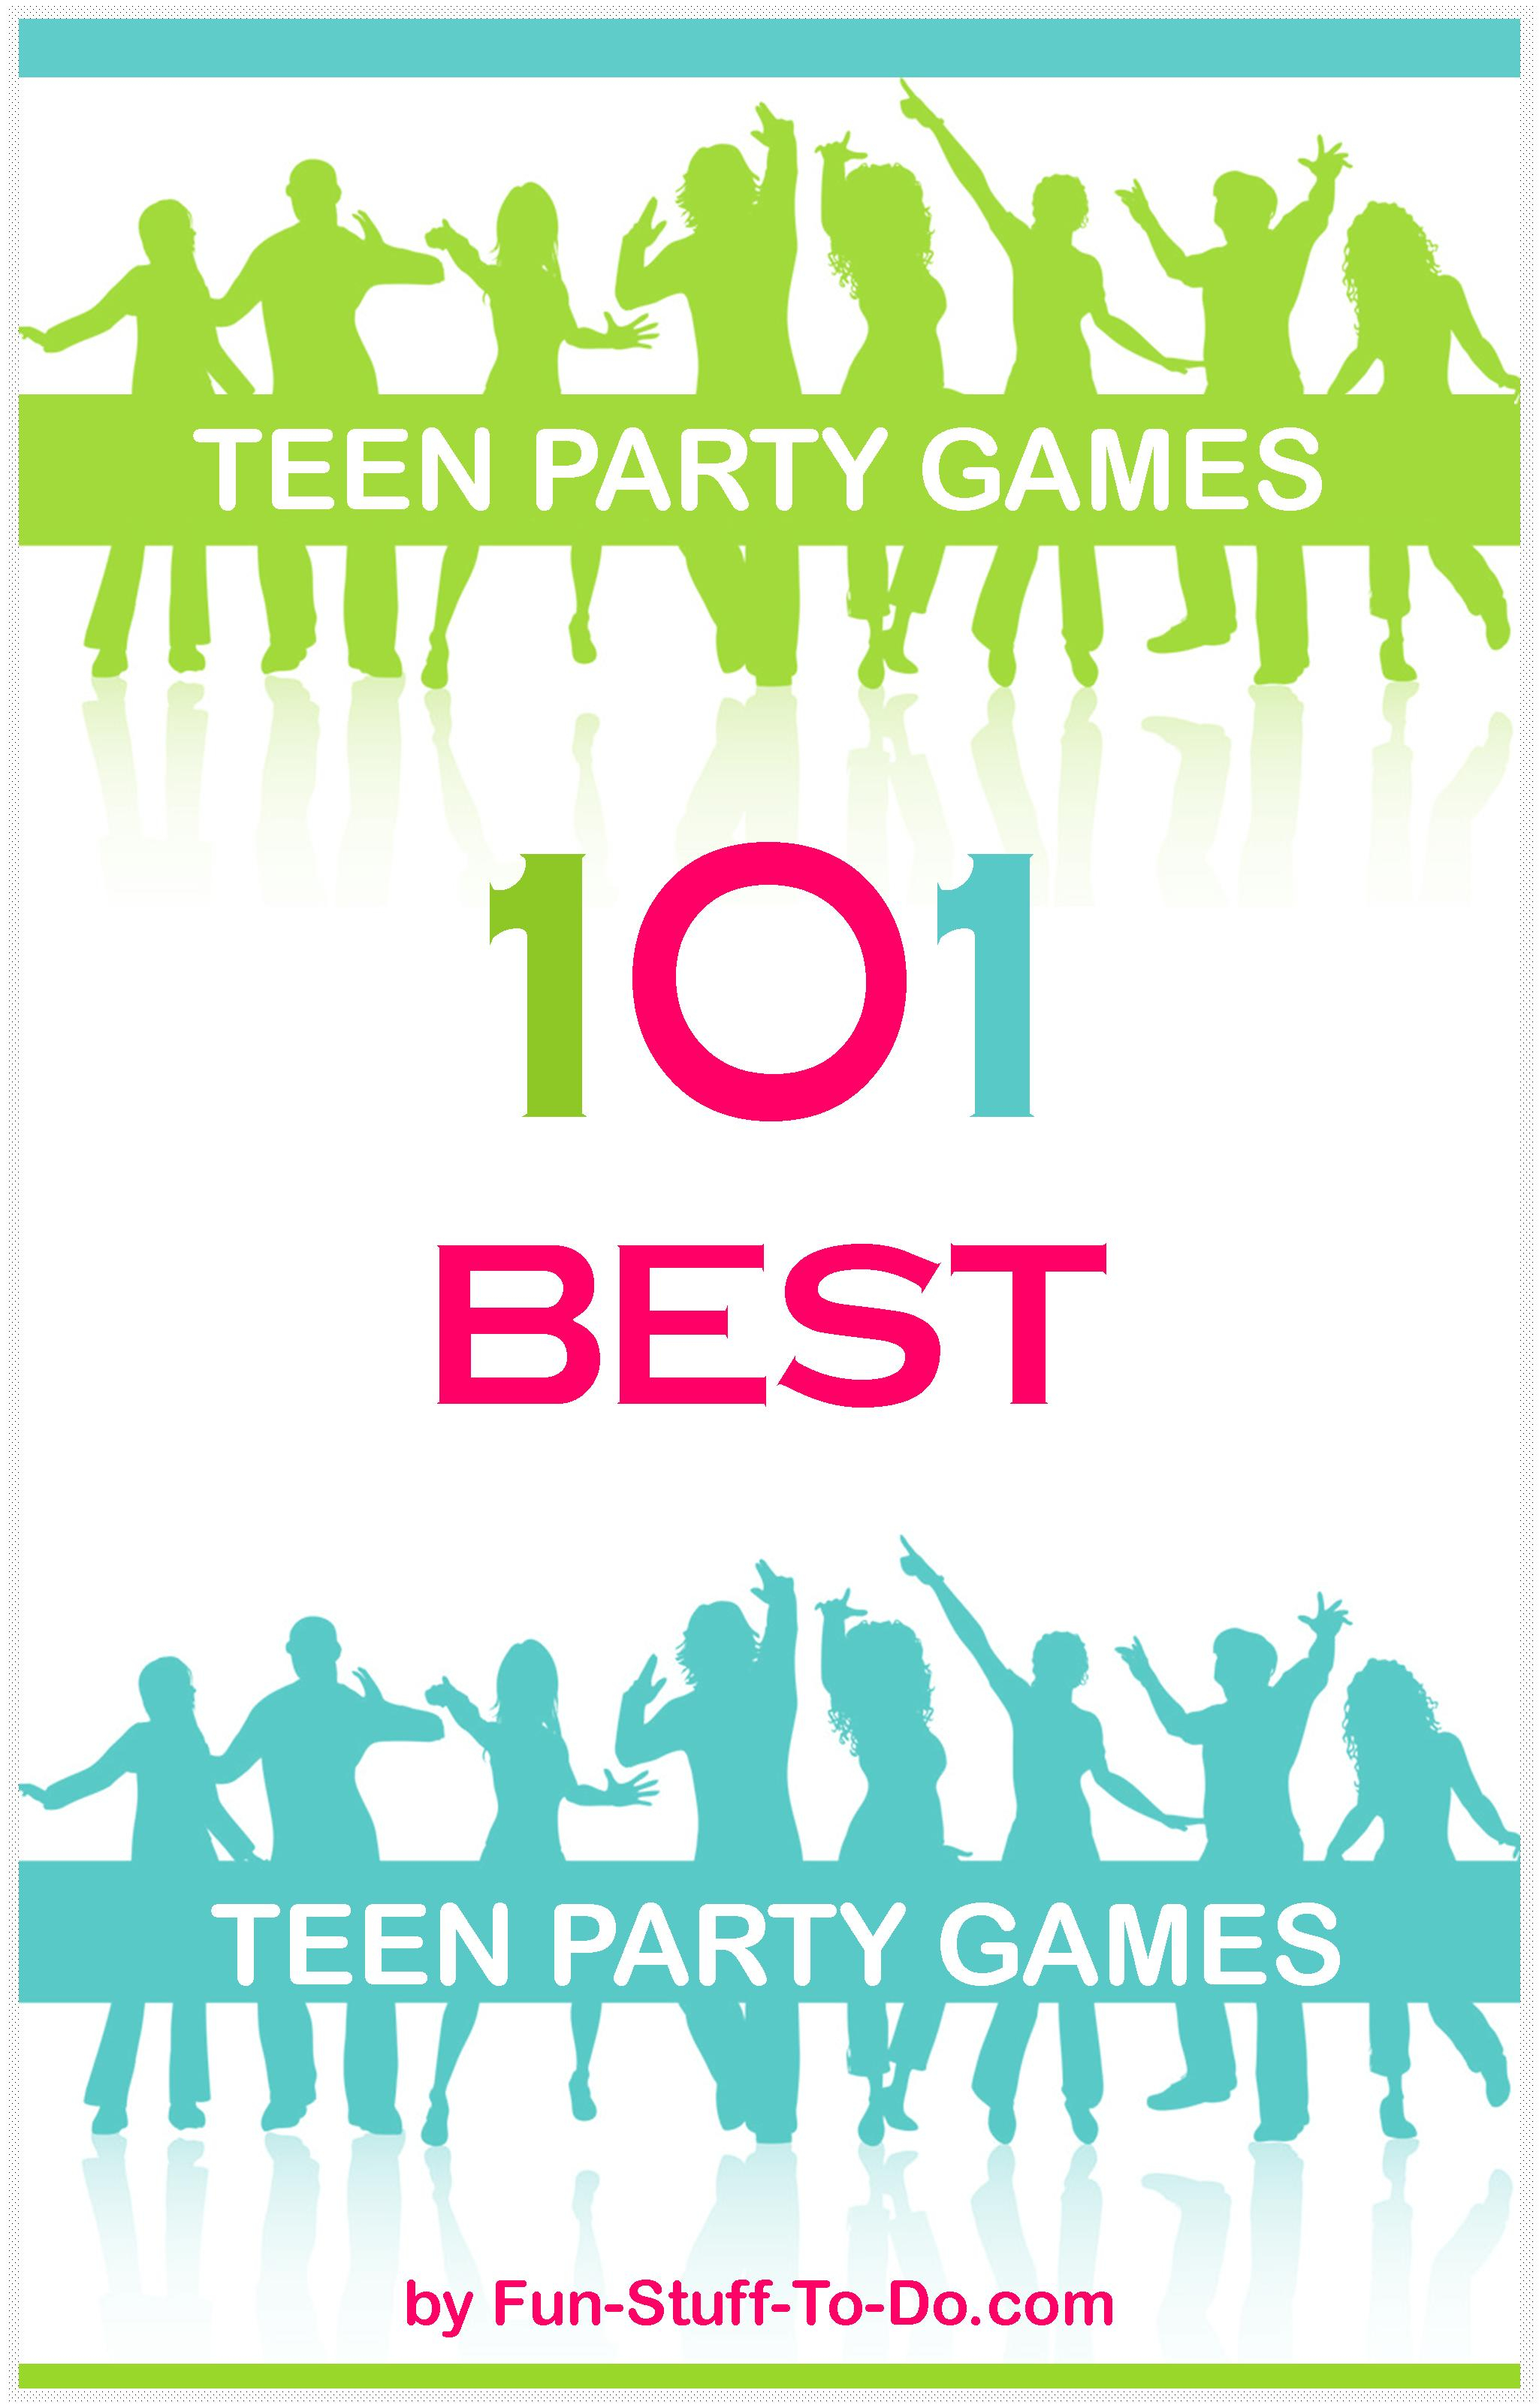 Birthday Card Ideas For Teenage Girl 20 Fun Teen Party Games You Have To Play Fun Stuff To Do